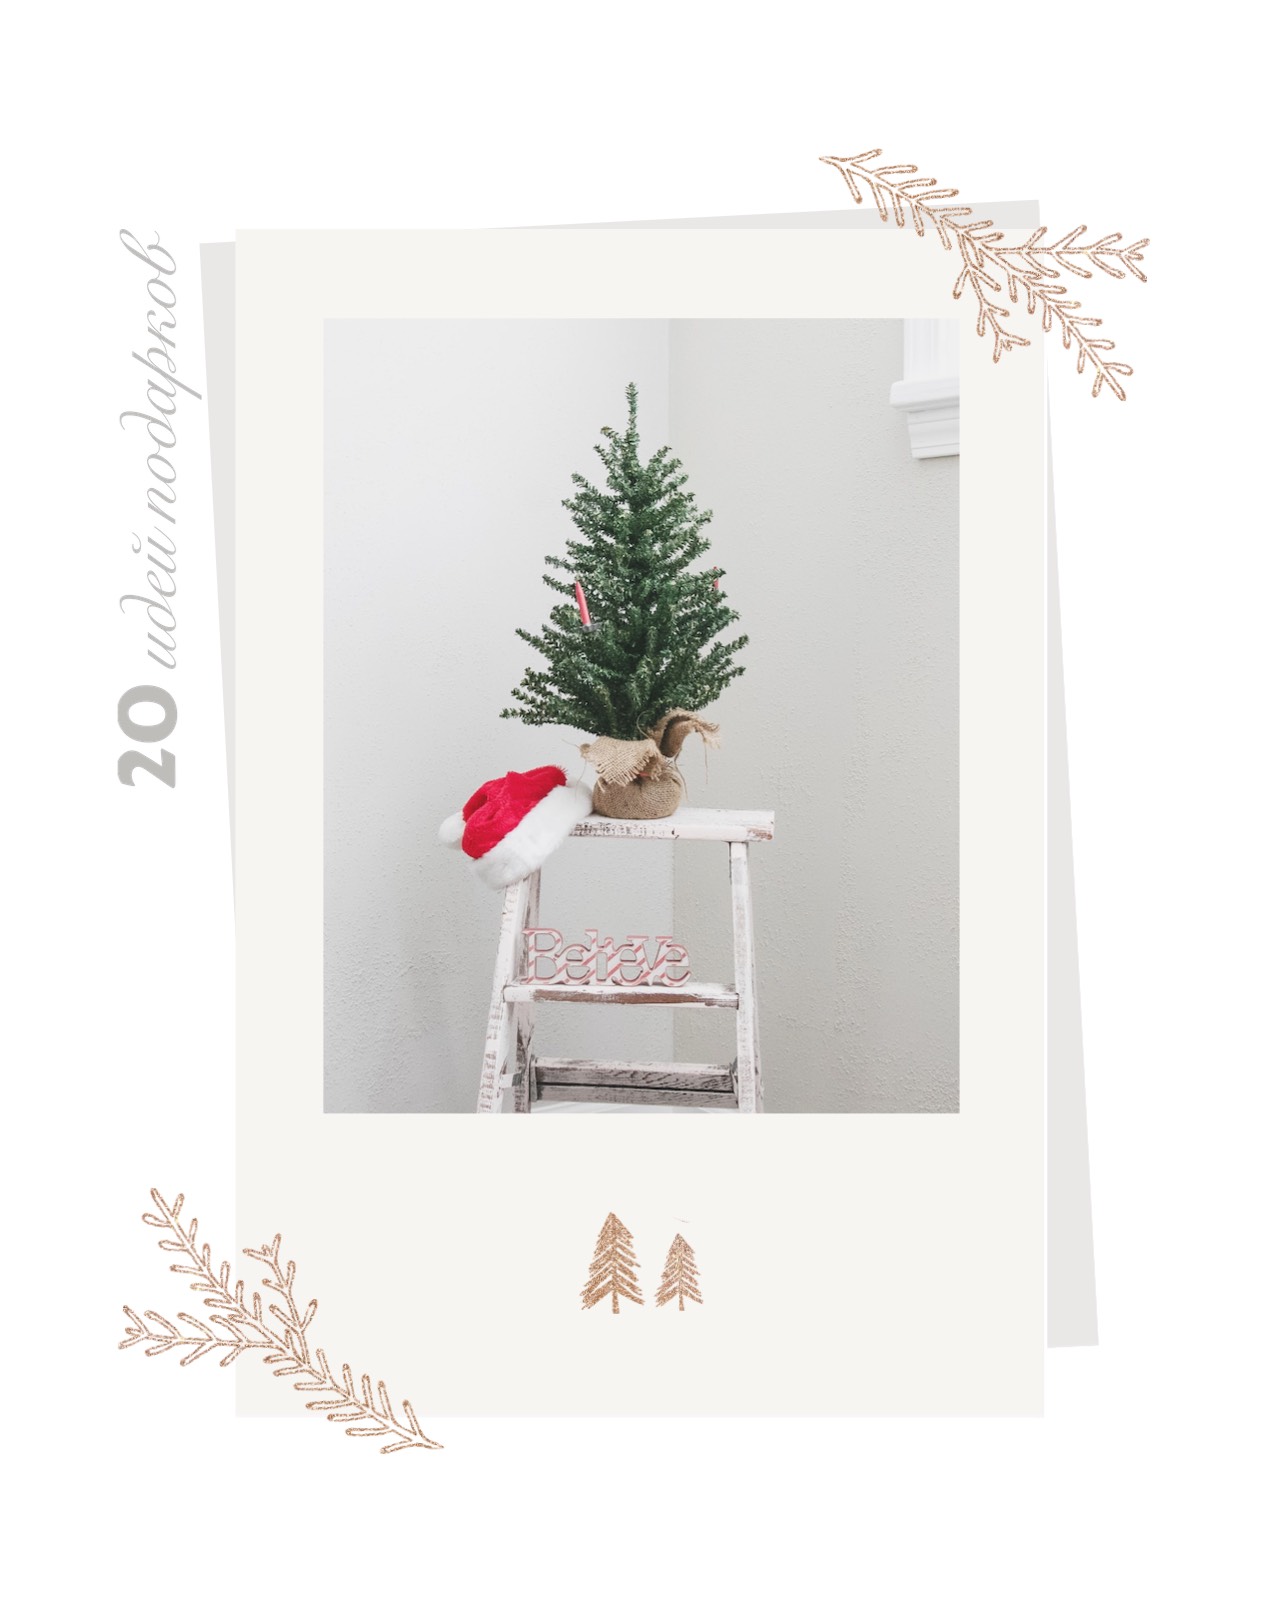 A Small Christmas Tree Sitting On Top Of A White Chair Template